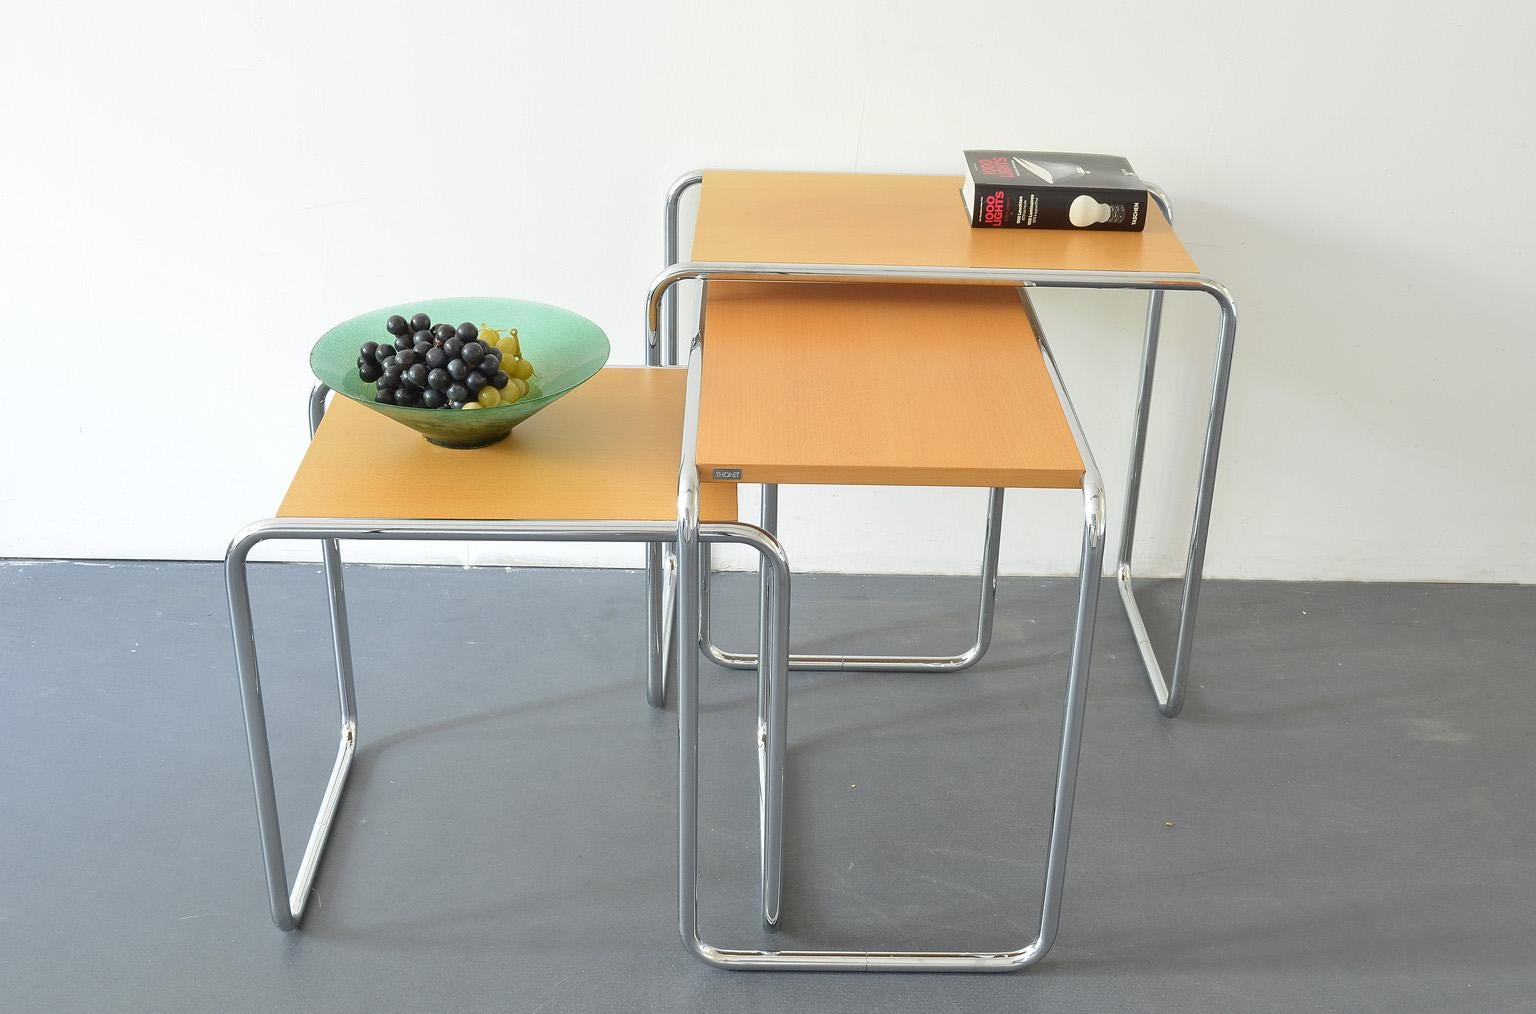 B9 staking tables / nesting tables.
Designed by Marcel Breuer for Thonet, Bauhaus.
A set of 3 pieces, light-brown wood.
B9b D x W x H in cm 39 x 50 x 52
B9c D x W x H in cm 39 x 55 x 59
B9d D x W x H in cm 39 x 60 x 66.